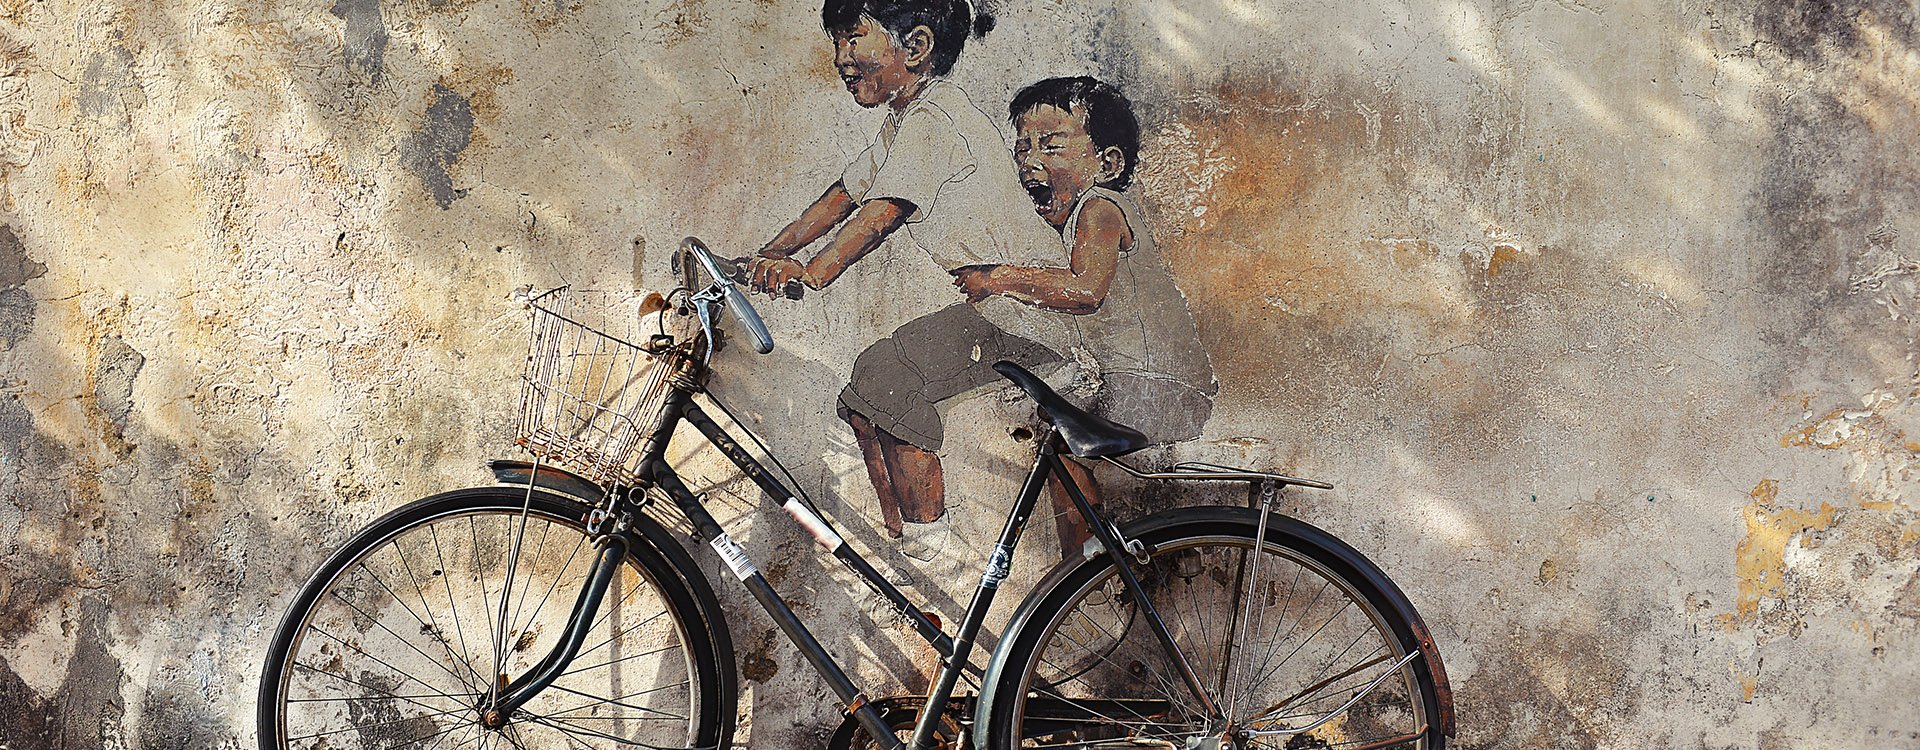 Street Mural entitled 'Little Children on a Bicycle', Penang Malaysia